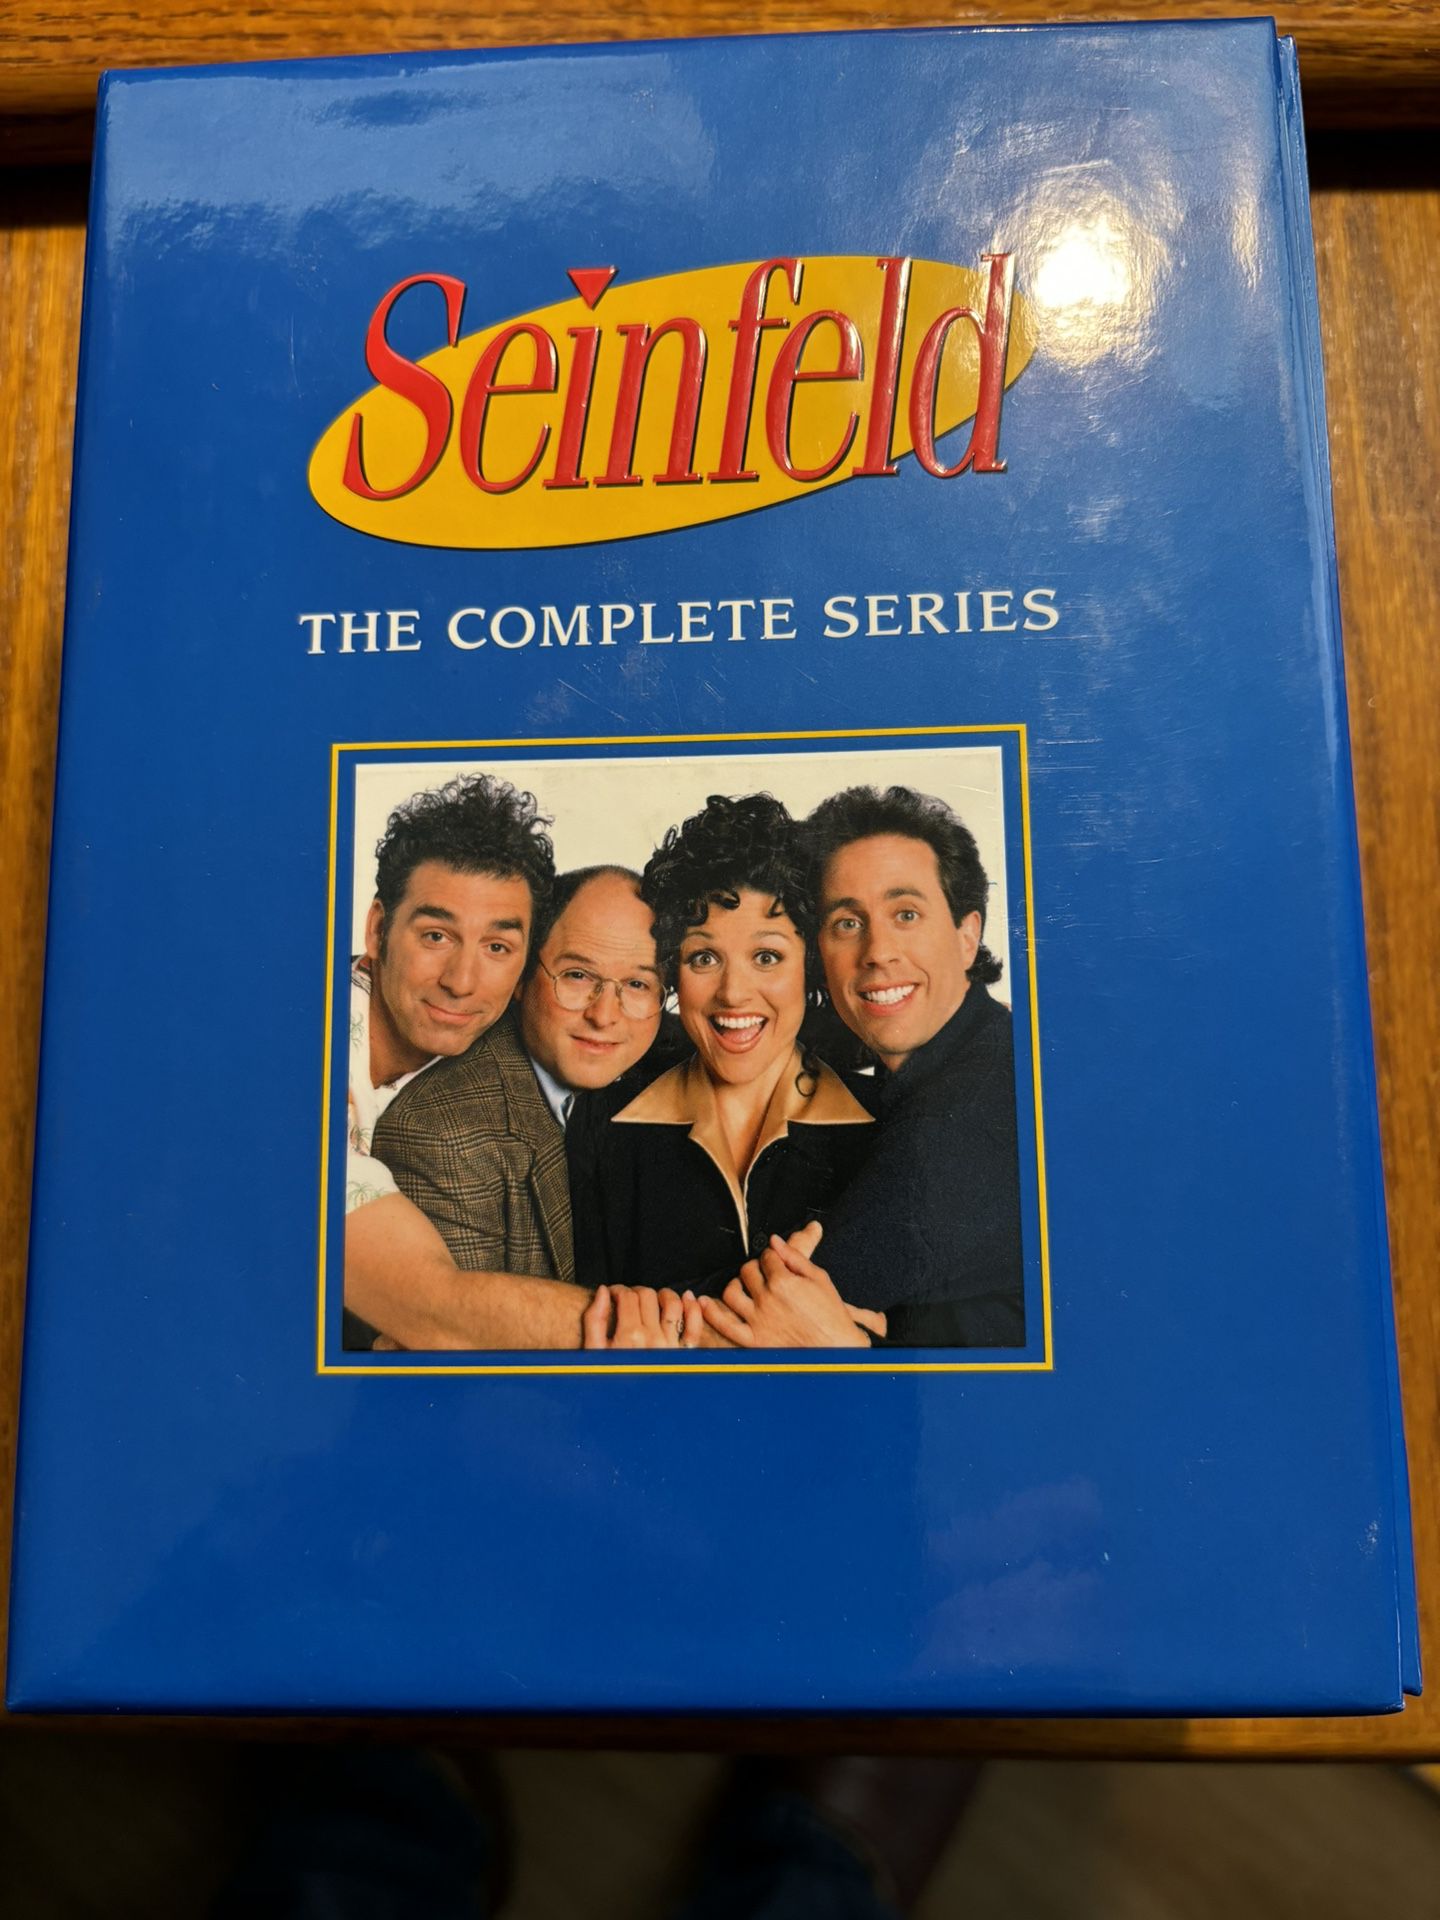 The Complete DVD Collection Of The Tv Show Seinfeld